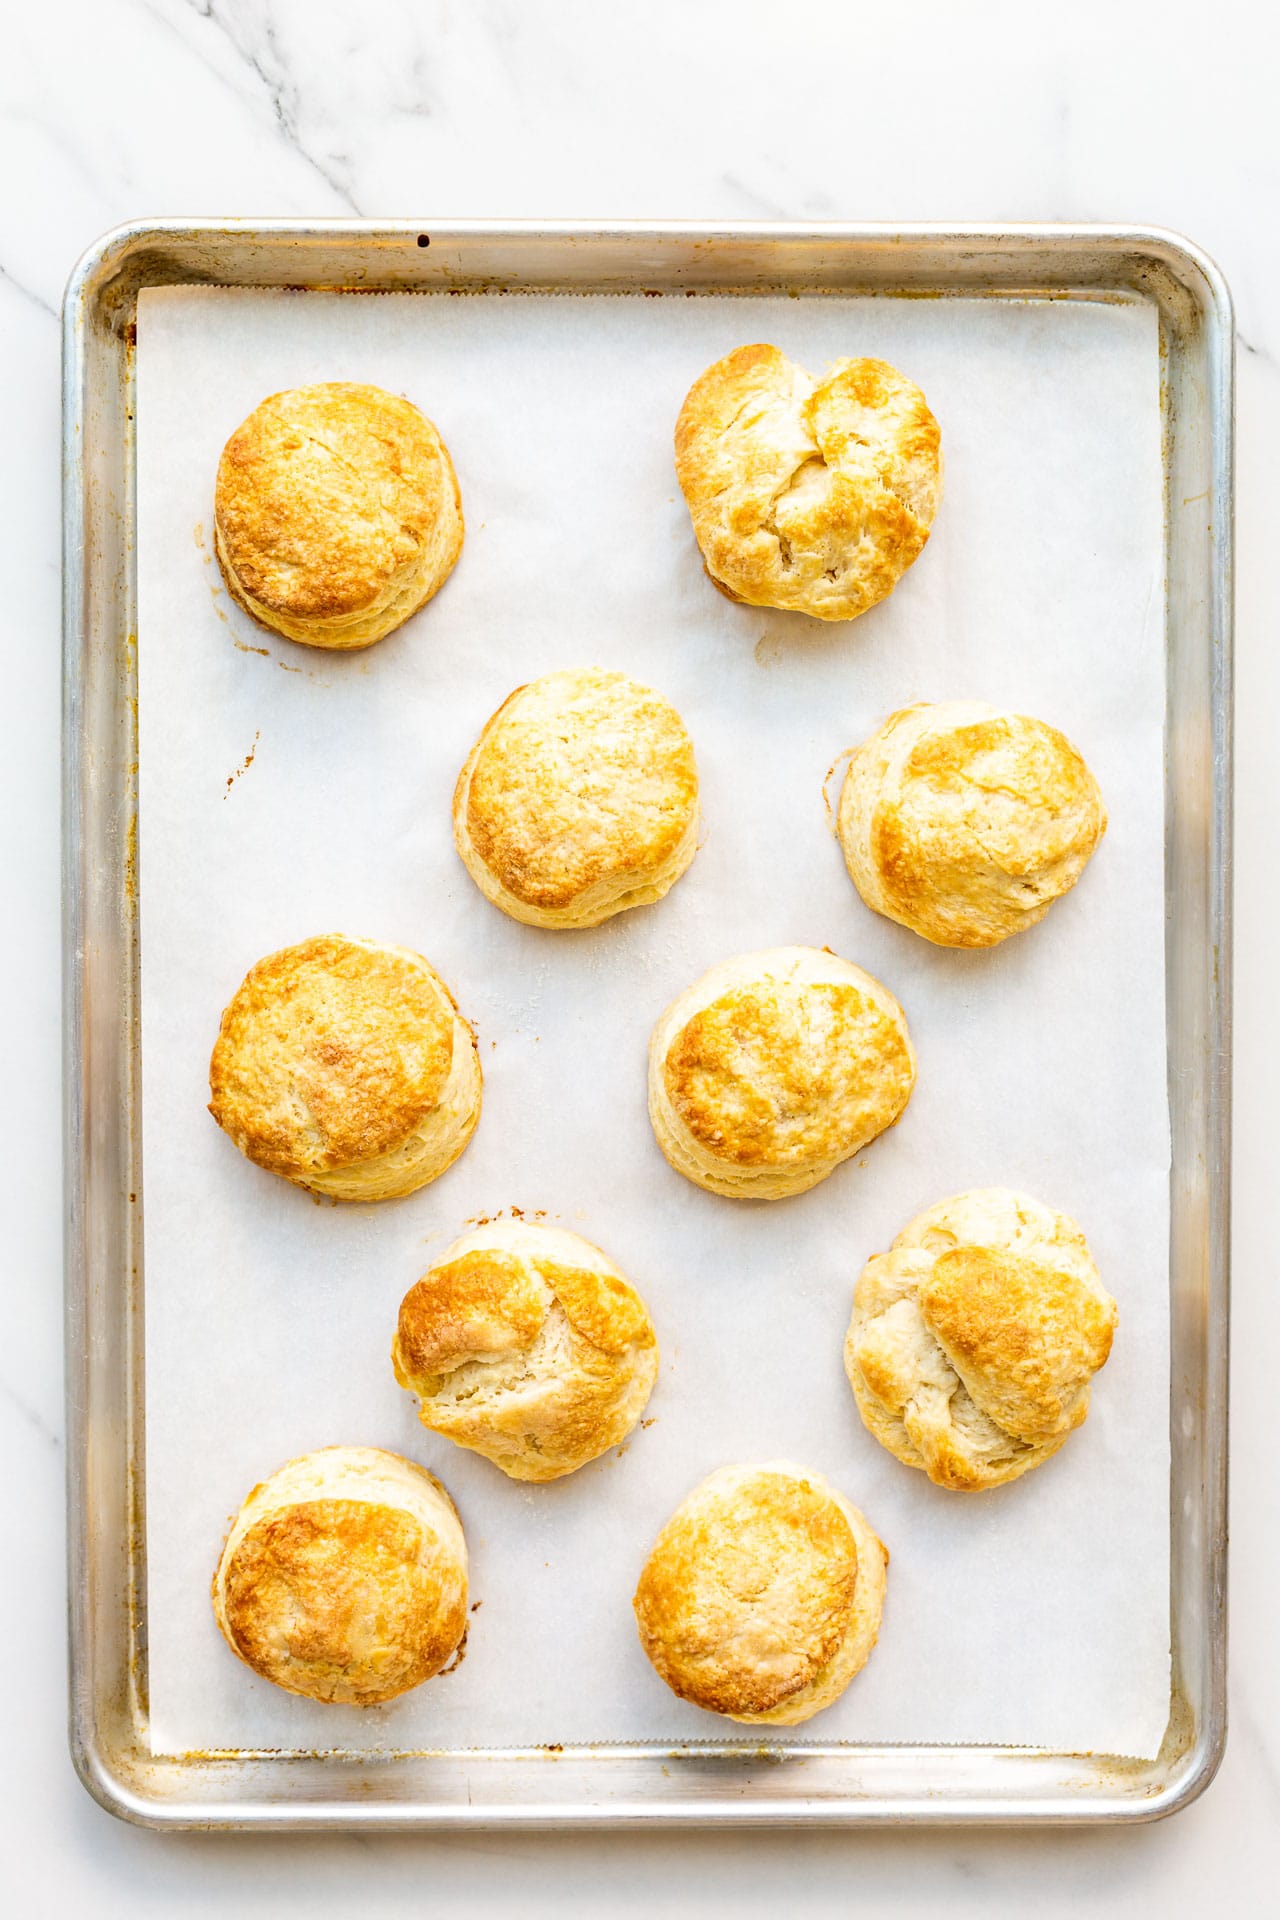 A parchment-lined sheet pan with golden brown homemade biscuits